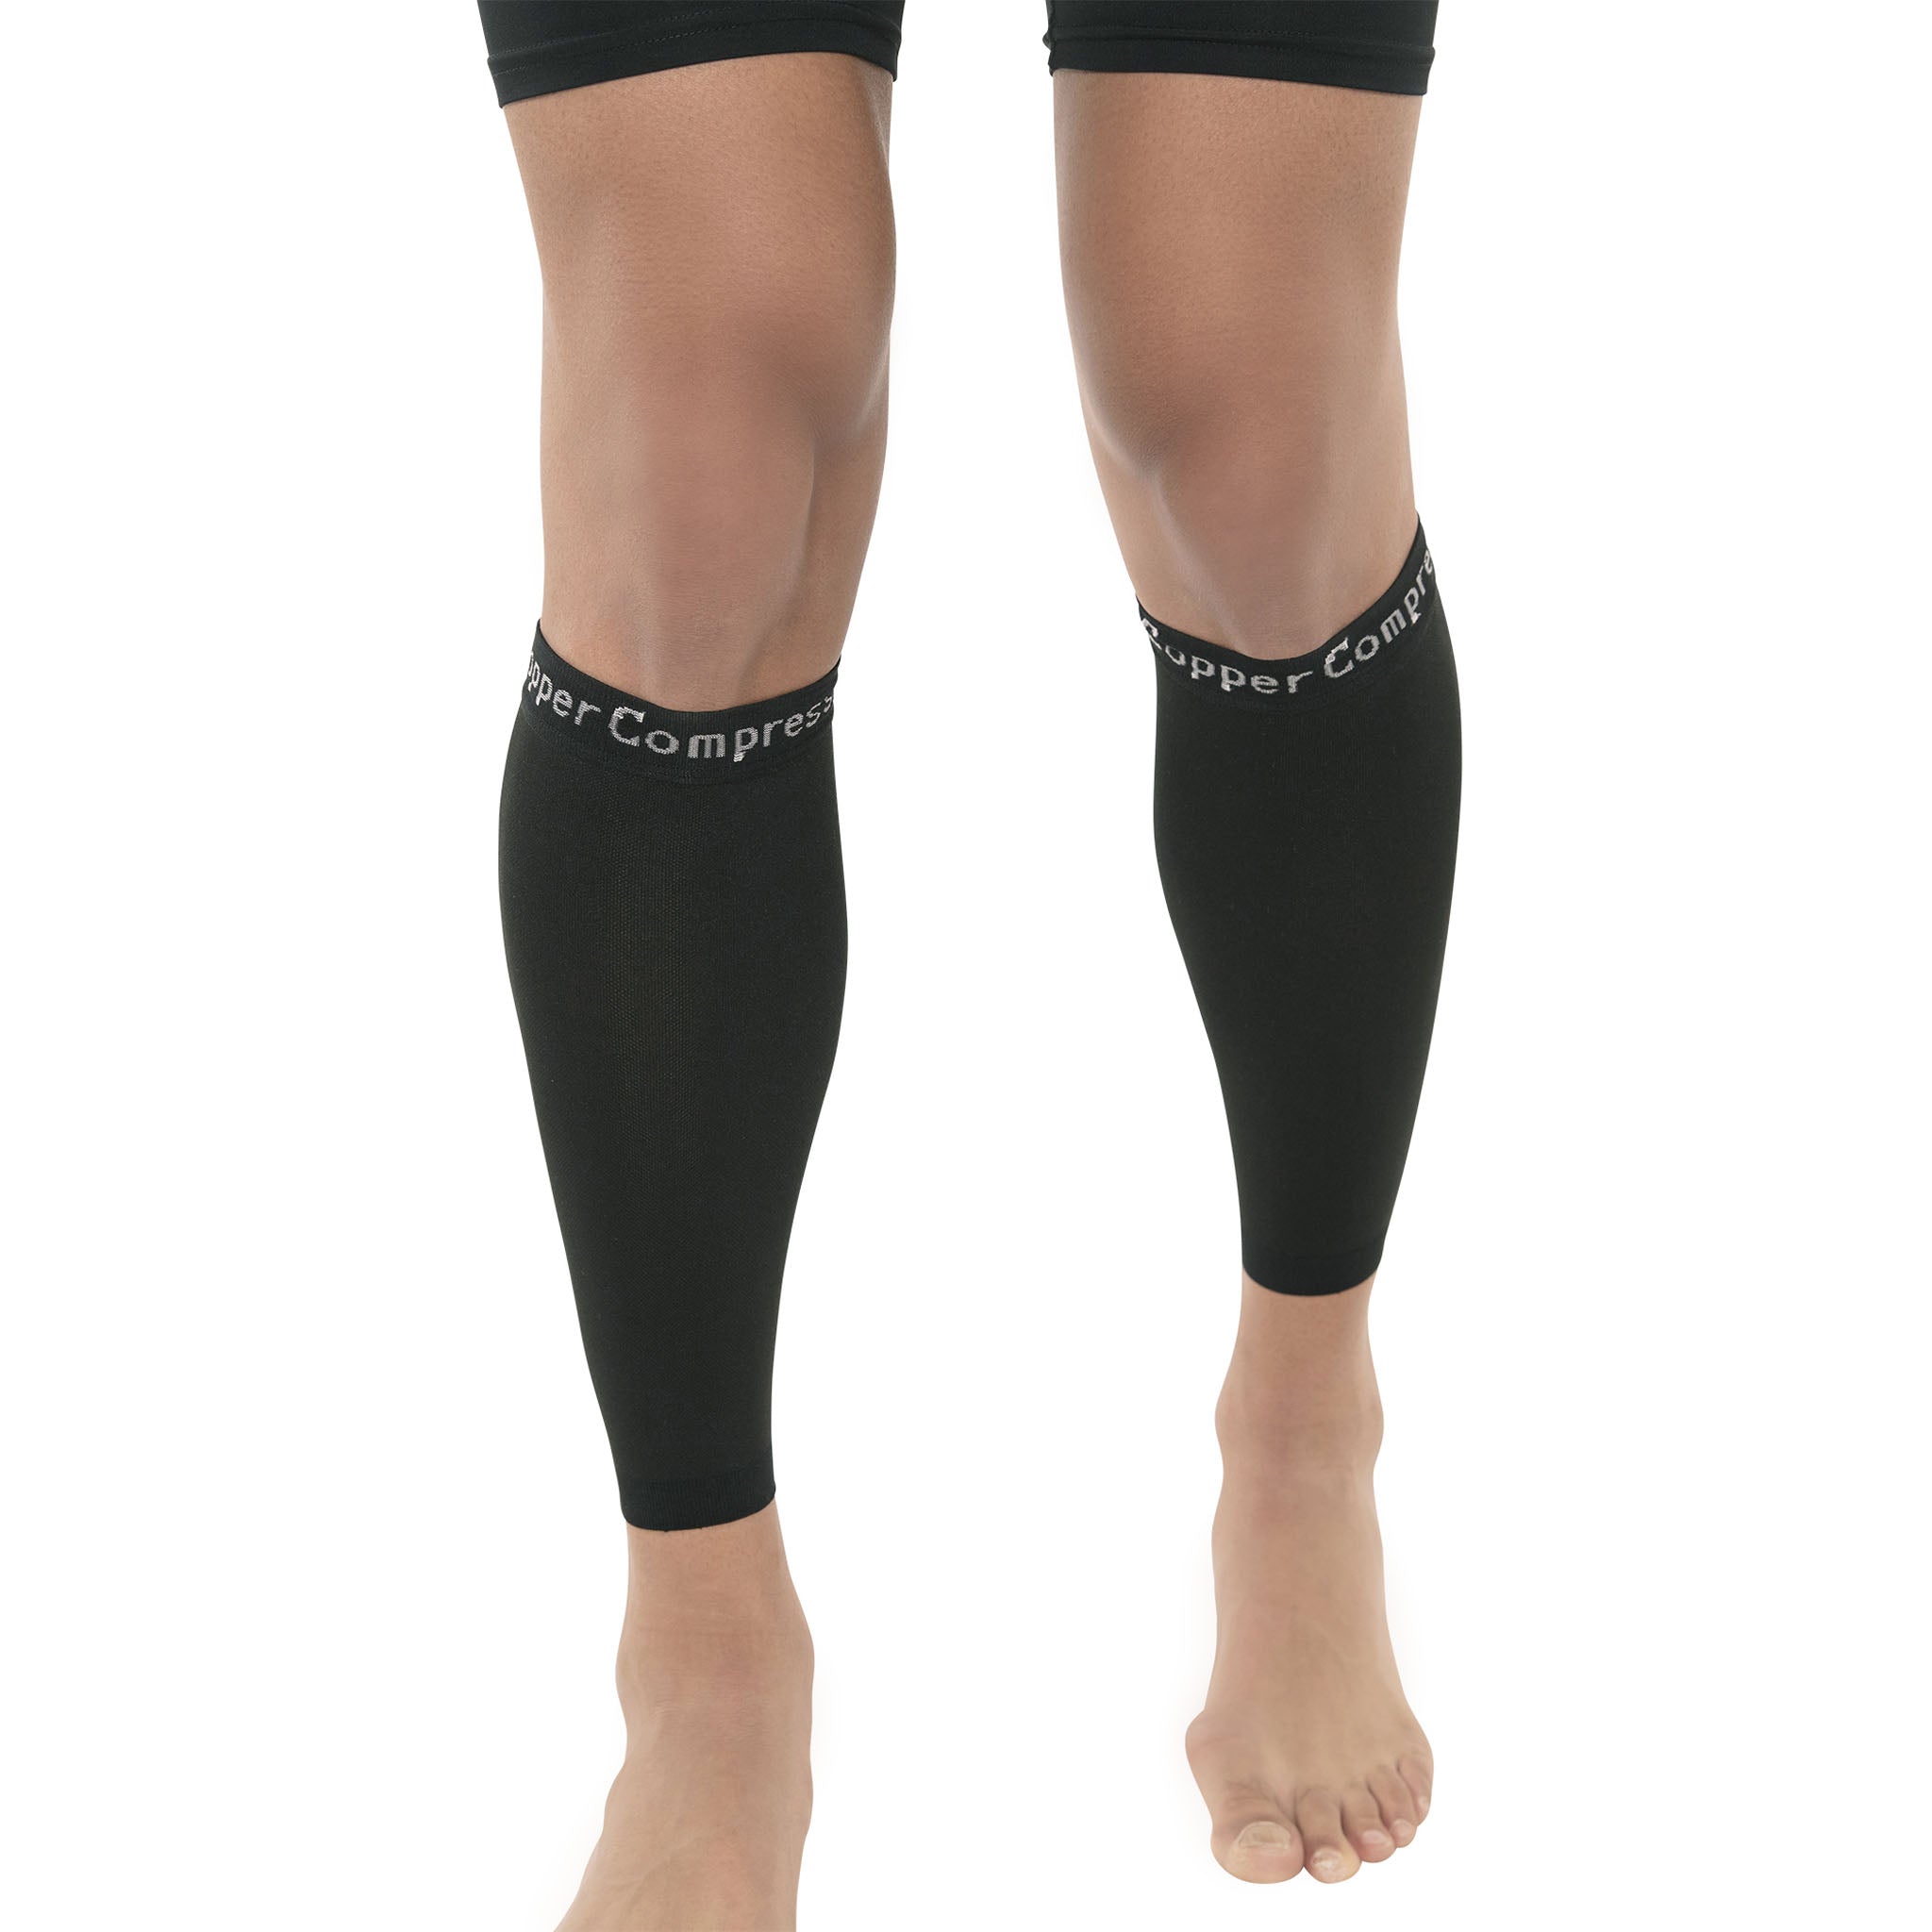 labyrint Verlichting micro Copper Compression Calf & Leg Sleeves - Fit & Performance Matters